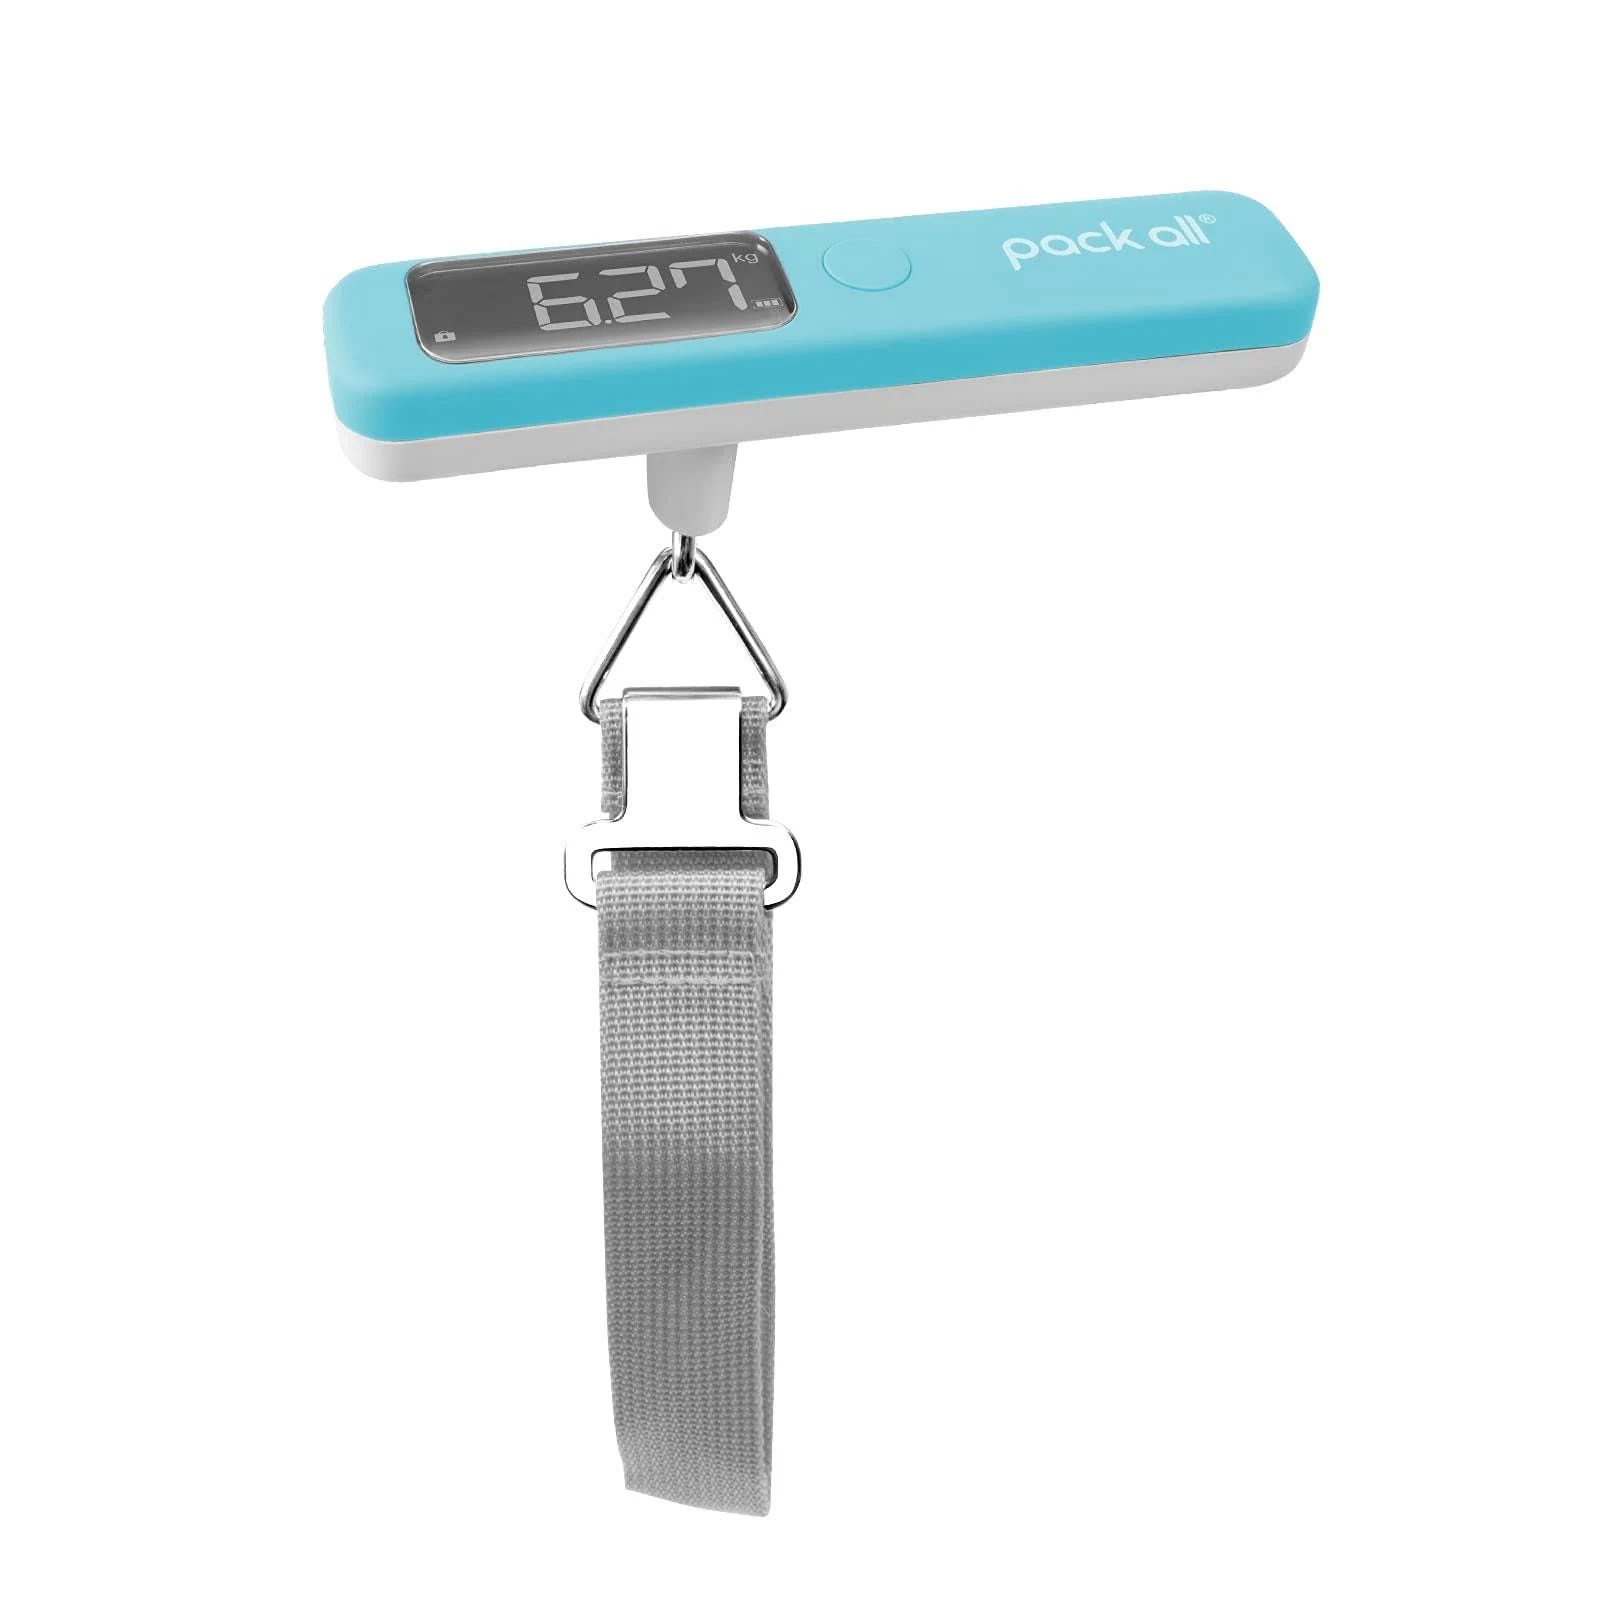 Portable Digital Handheld Luggage Scale with Tare Function | Image